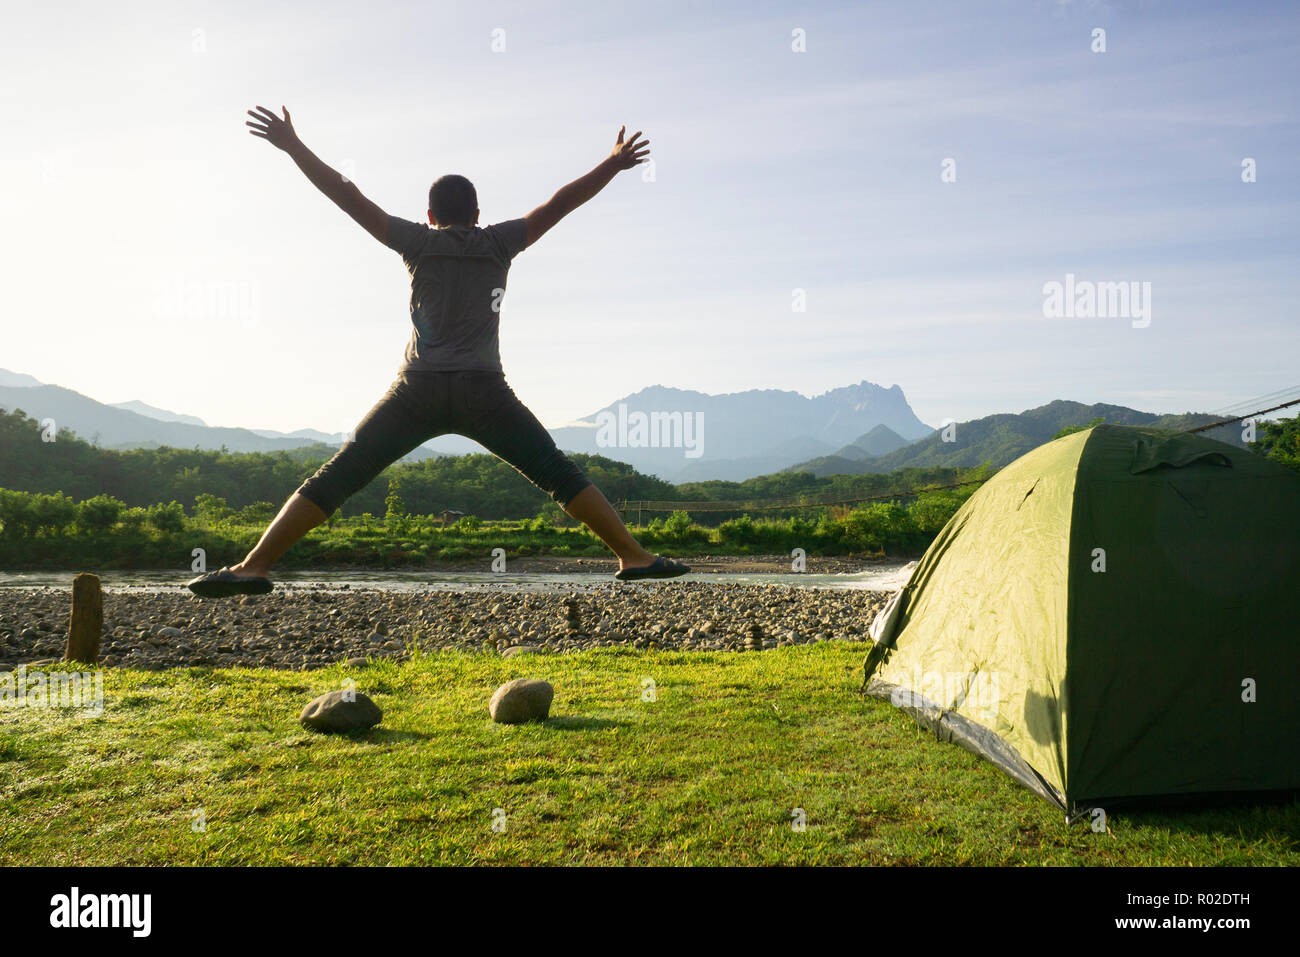 man jumping at campsite with beautiful mountain background. Stock Photo